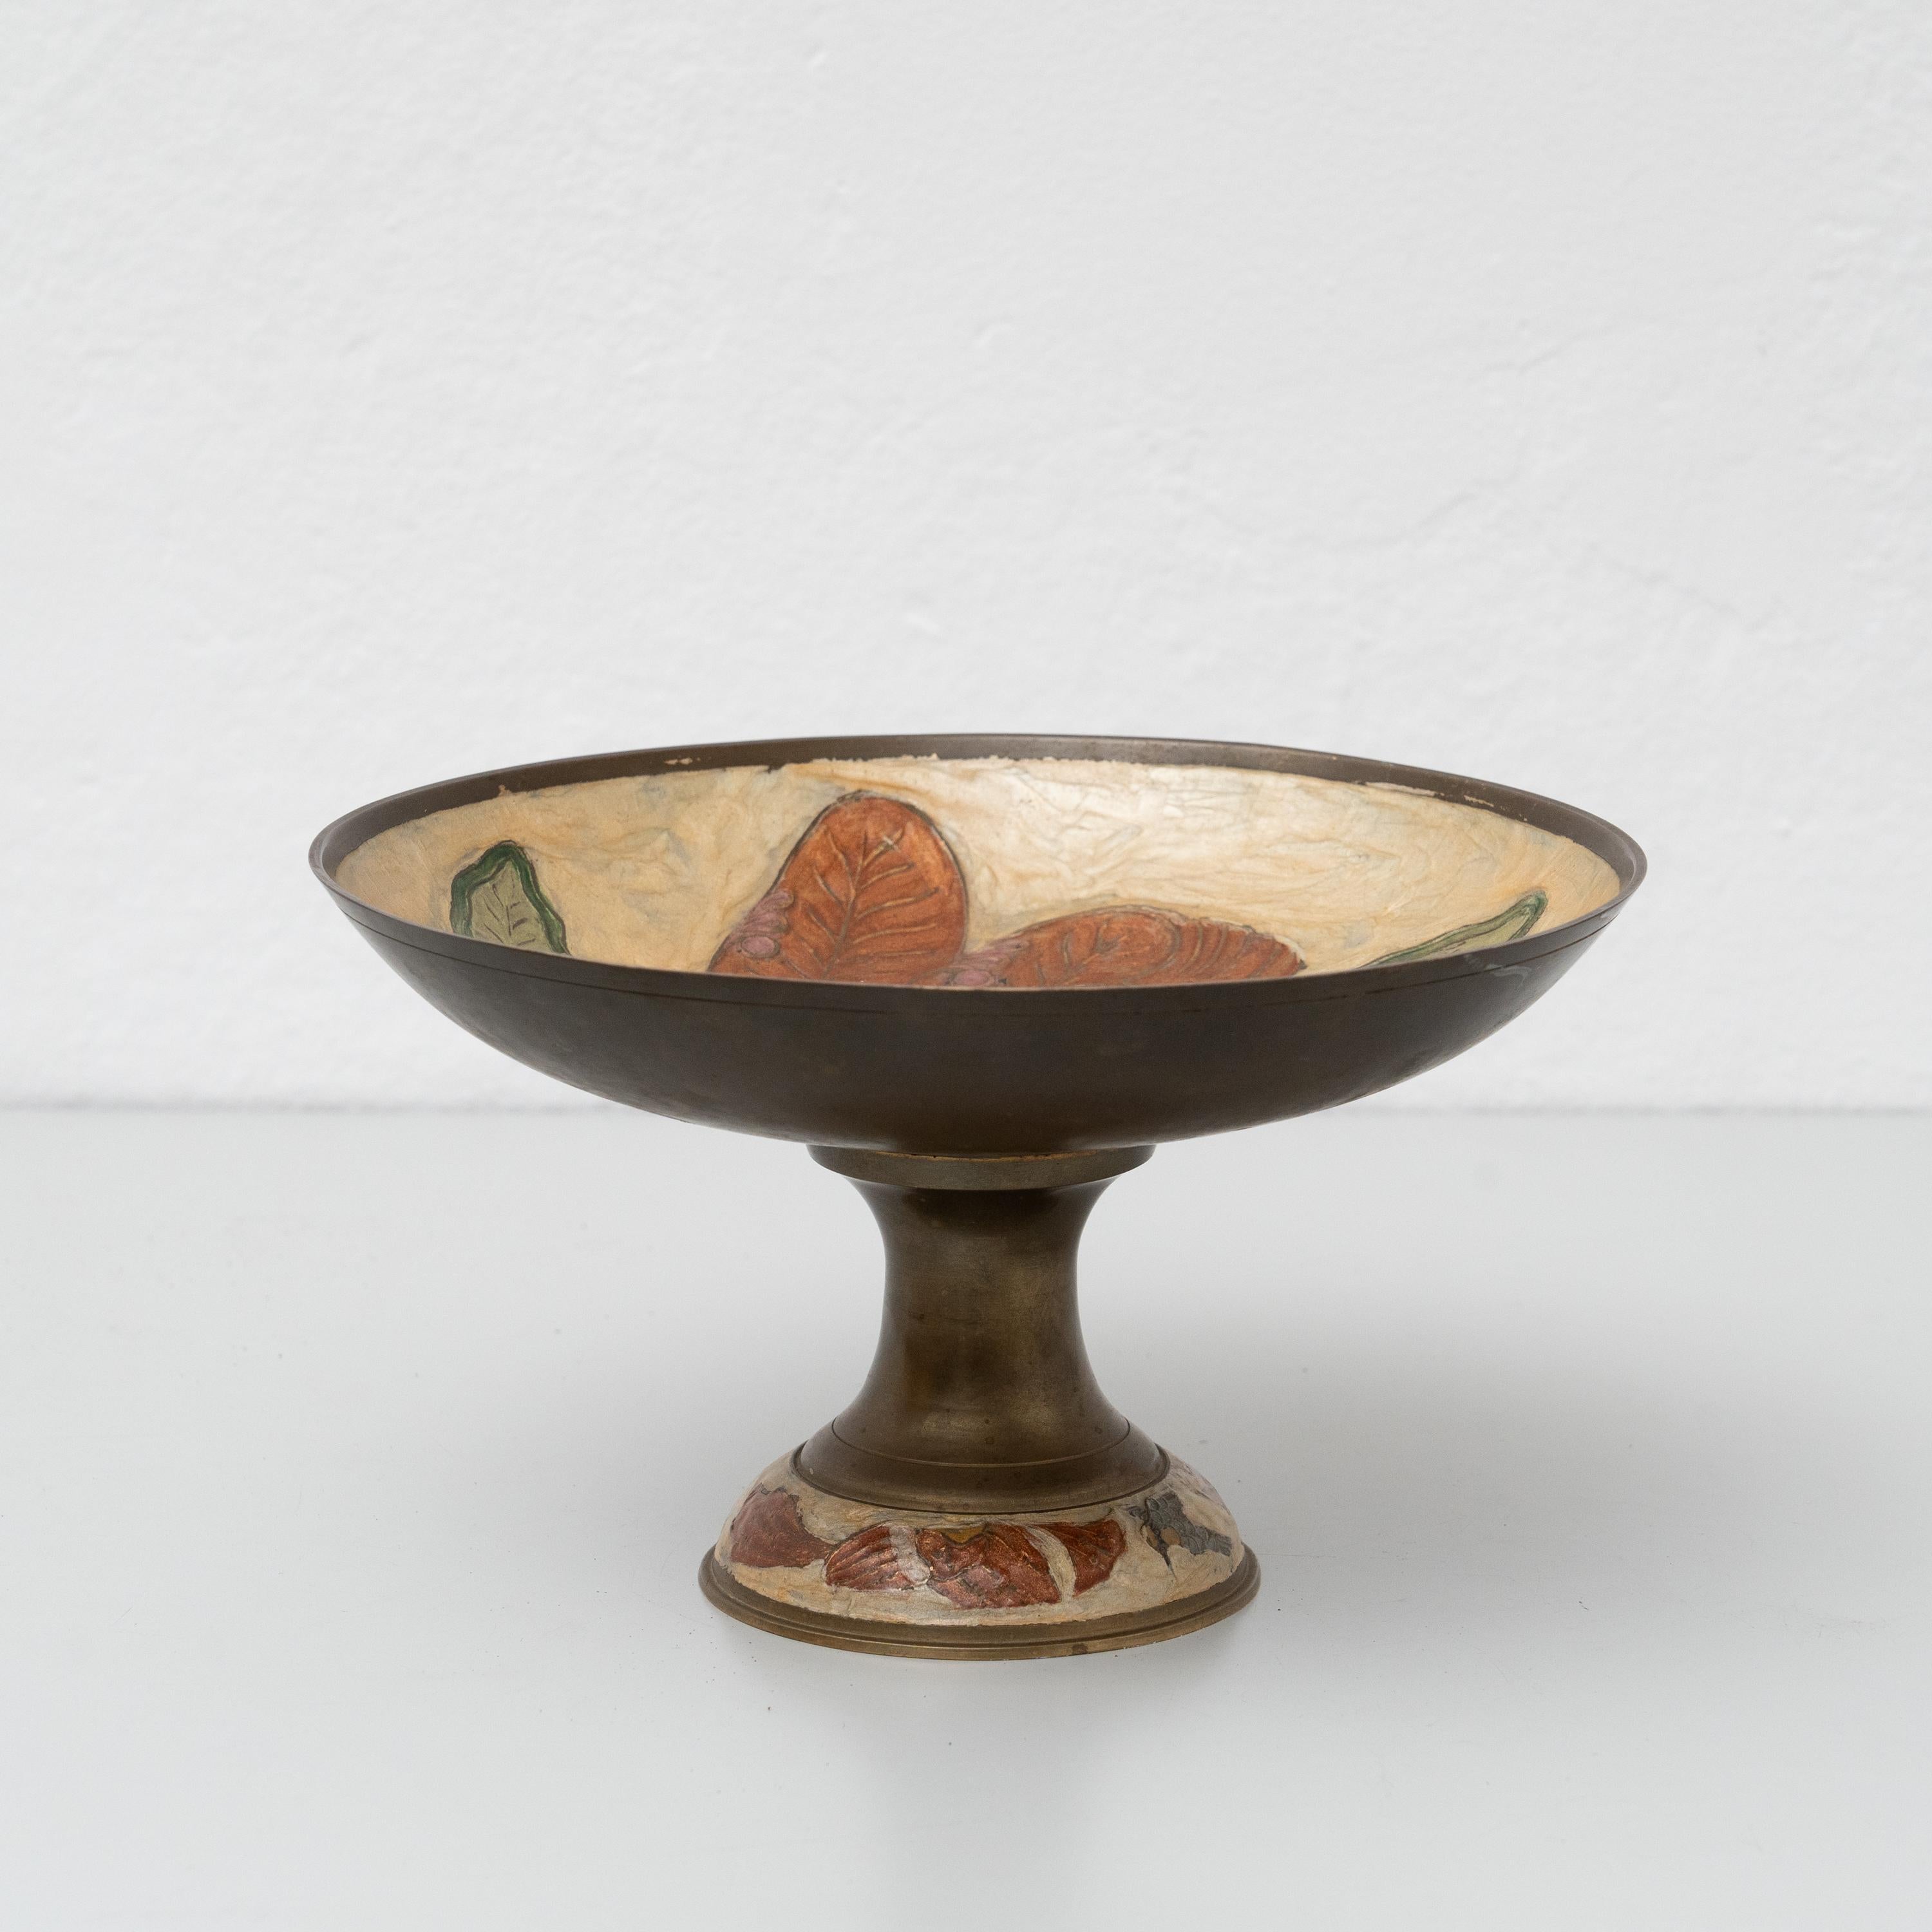 Brassfruit bowl.
By unknown manufacturer from Spain, circa 1980.

In original condition, with minor wear consistent with age and use, preserving a beautiful patina.

Material:
Brass.

Dimensions:
ø 24.5 cm x H 14 cm.